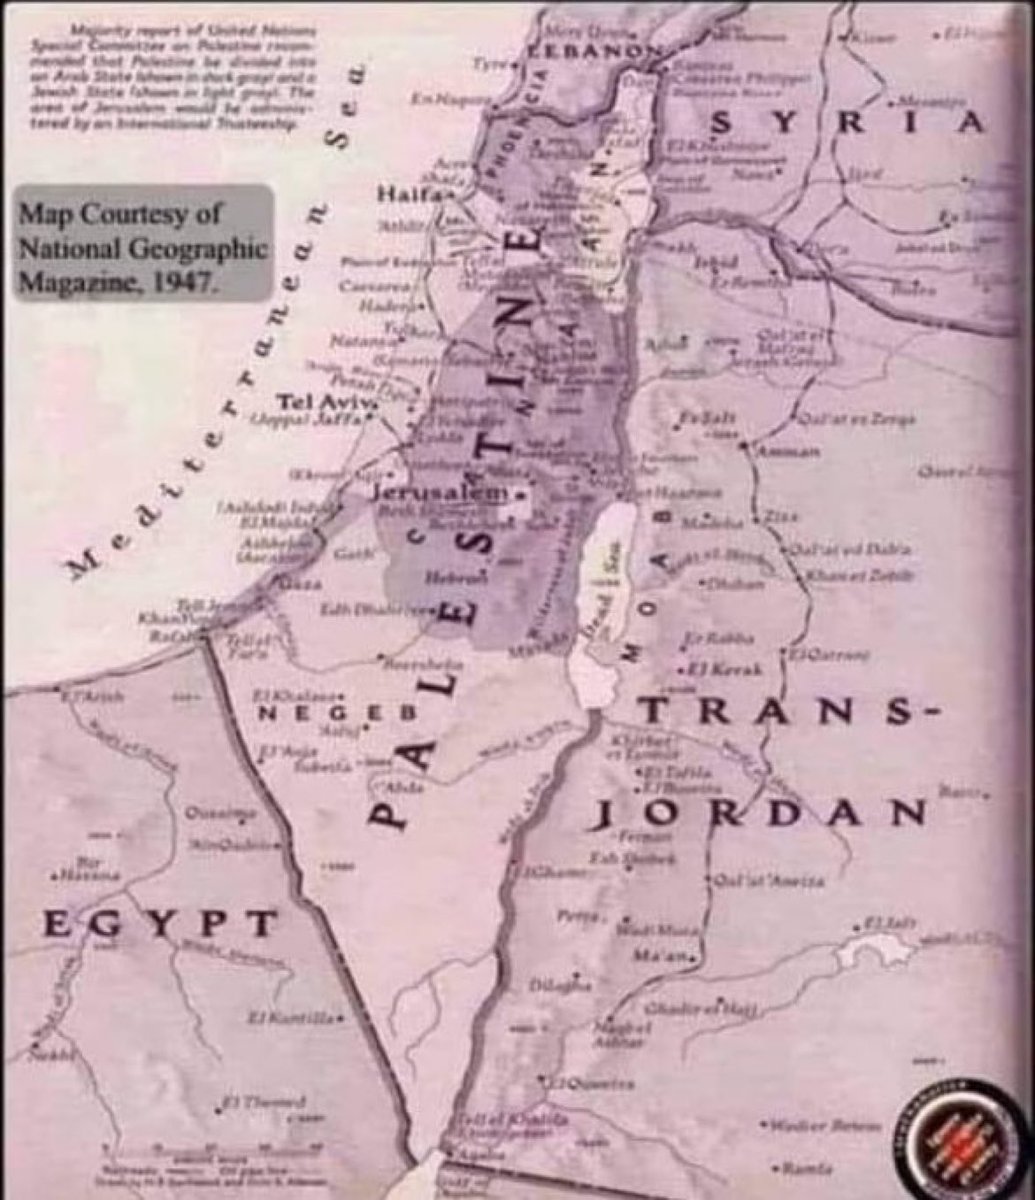 This map was issued by National Geographic in 1947, one year before the Nakba, there was no such thing called “Israel”.